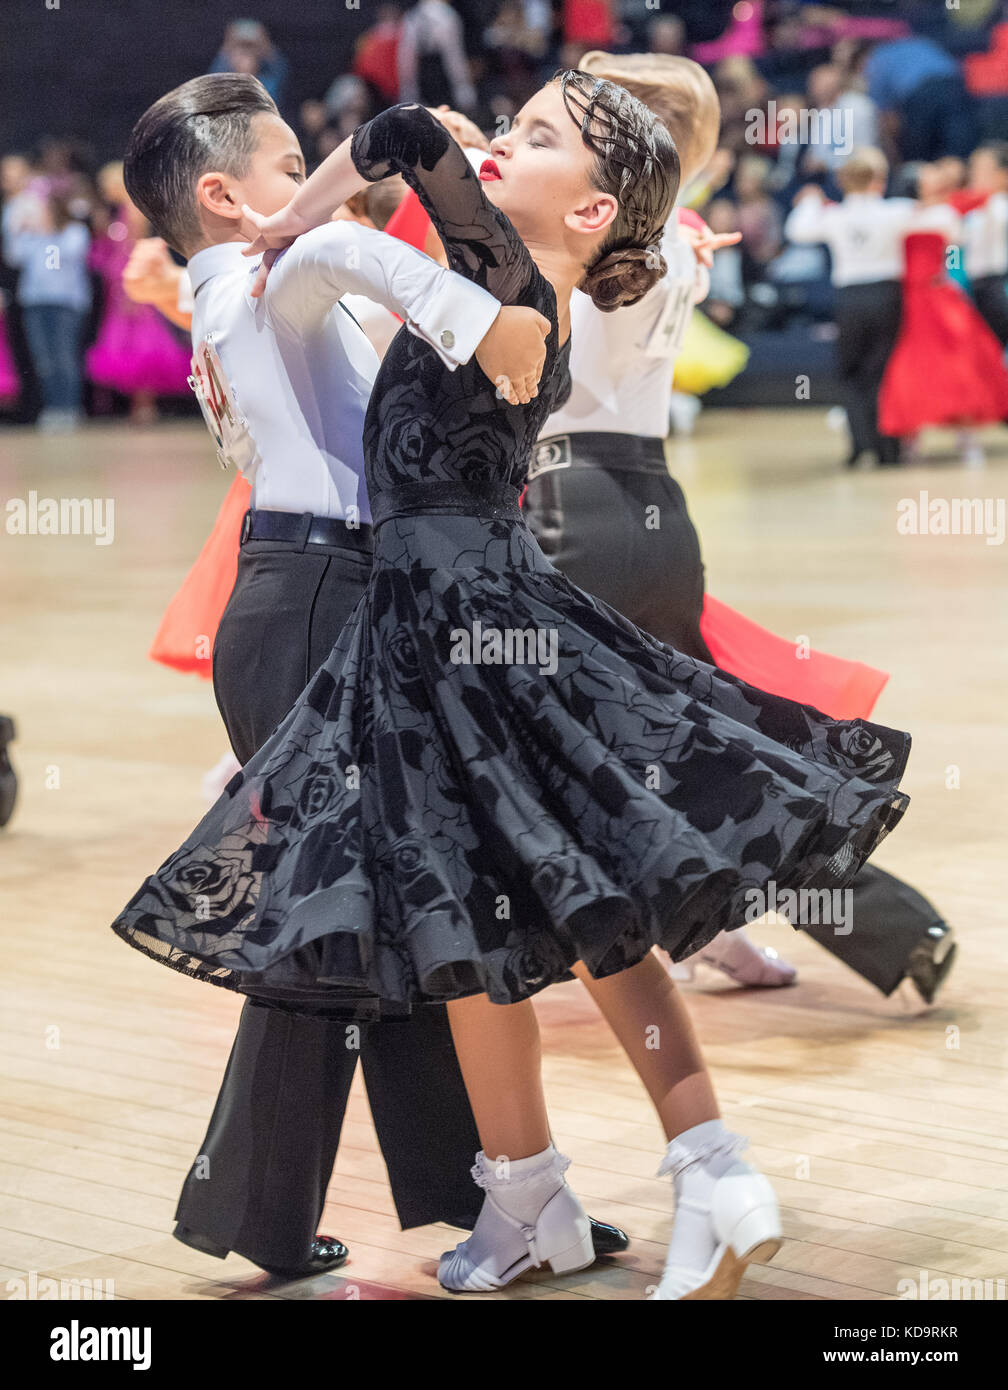 Brentwood, Essex, 11th October 2017 International Ballroom Championships at the International Hall, Brentwood., Juvenile Section Credit: Ian Davidson/Alamy Live News Stock Photo